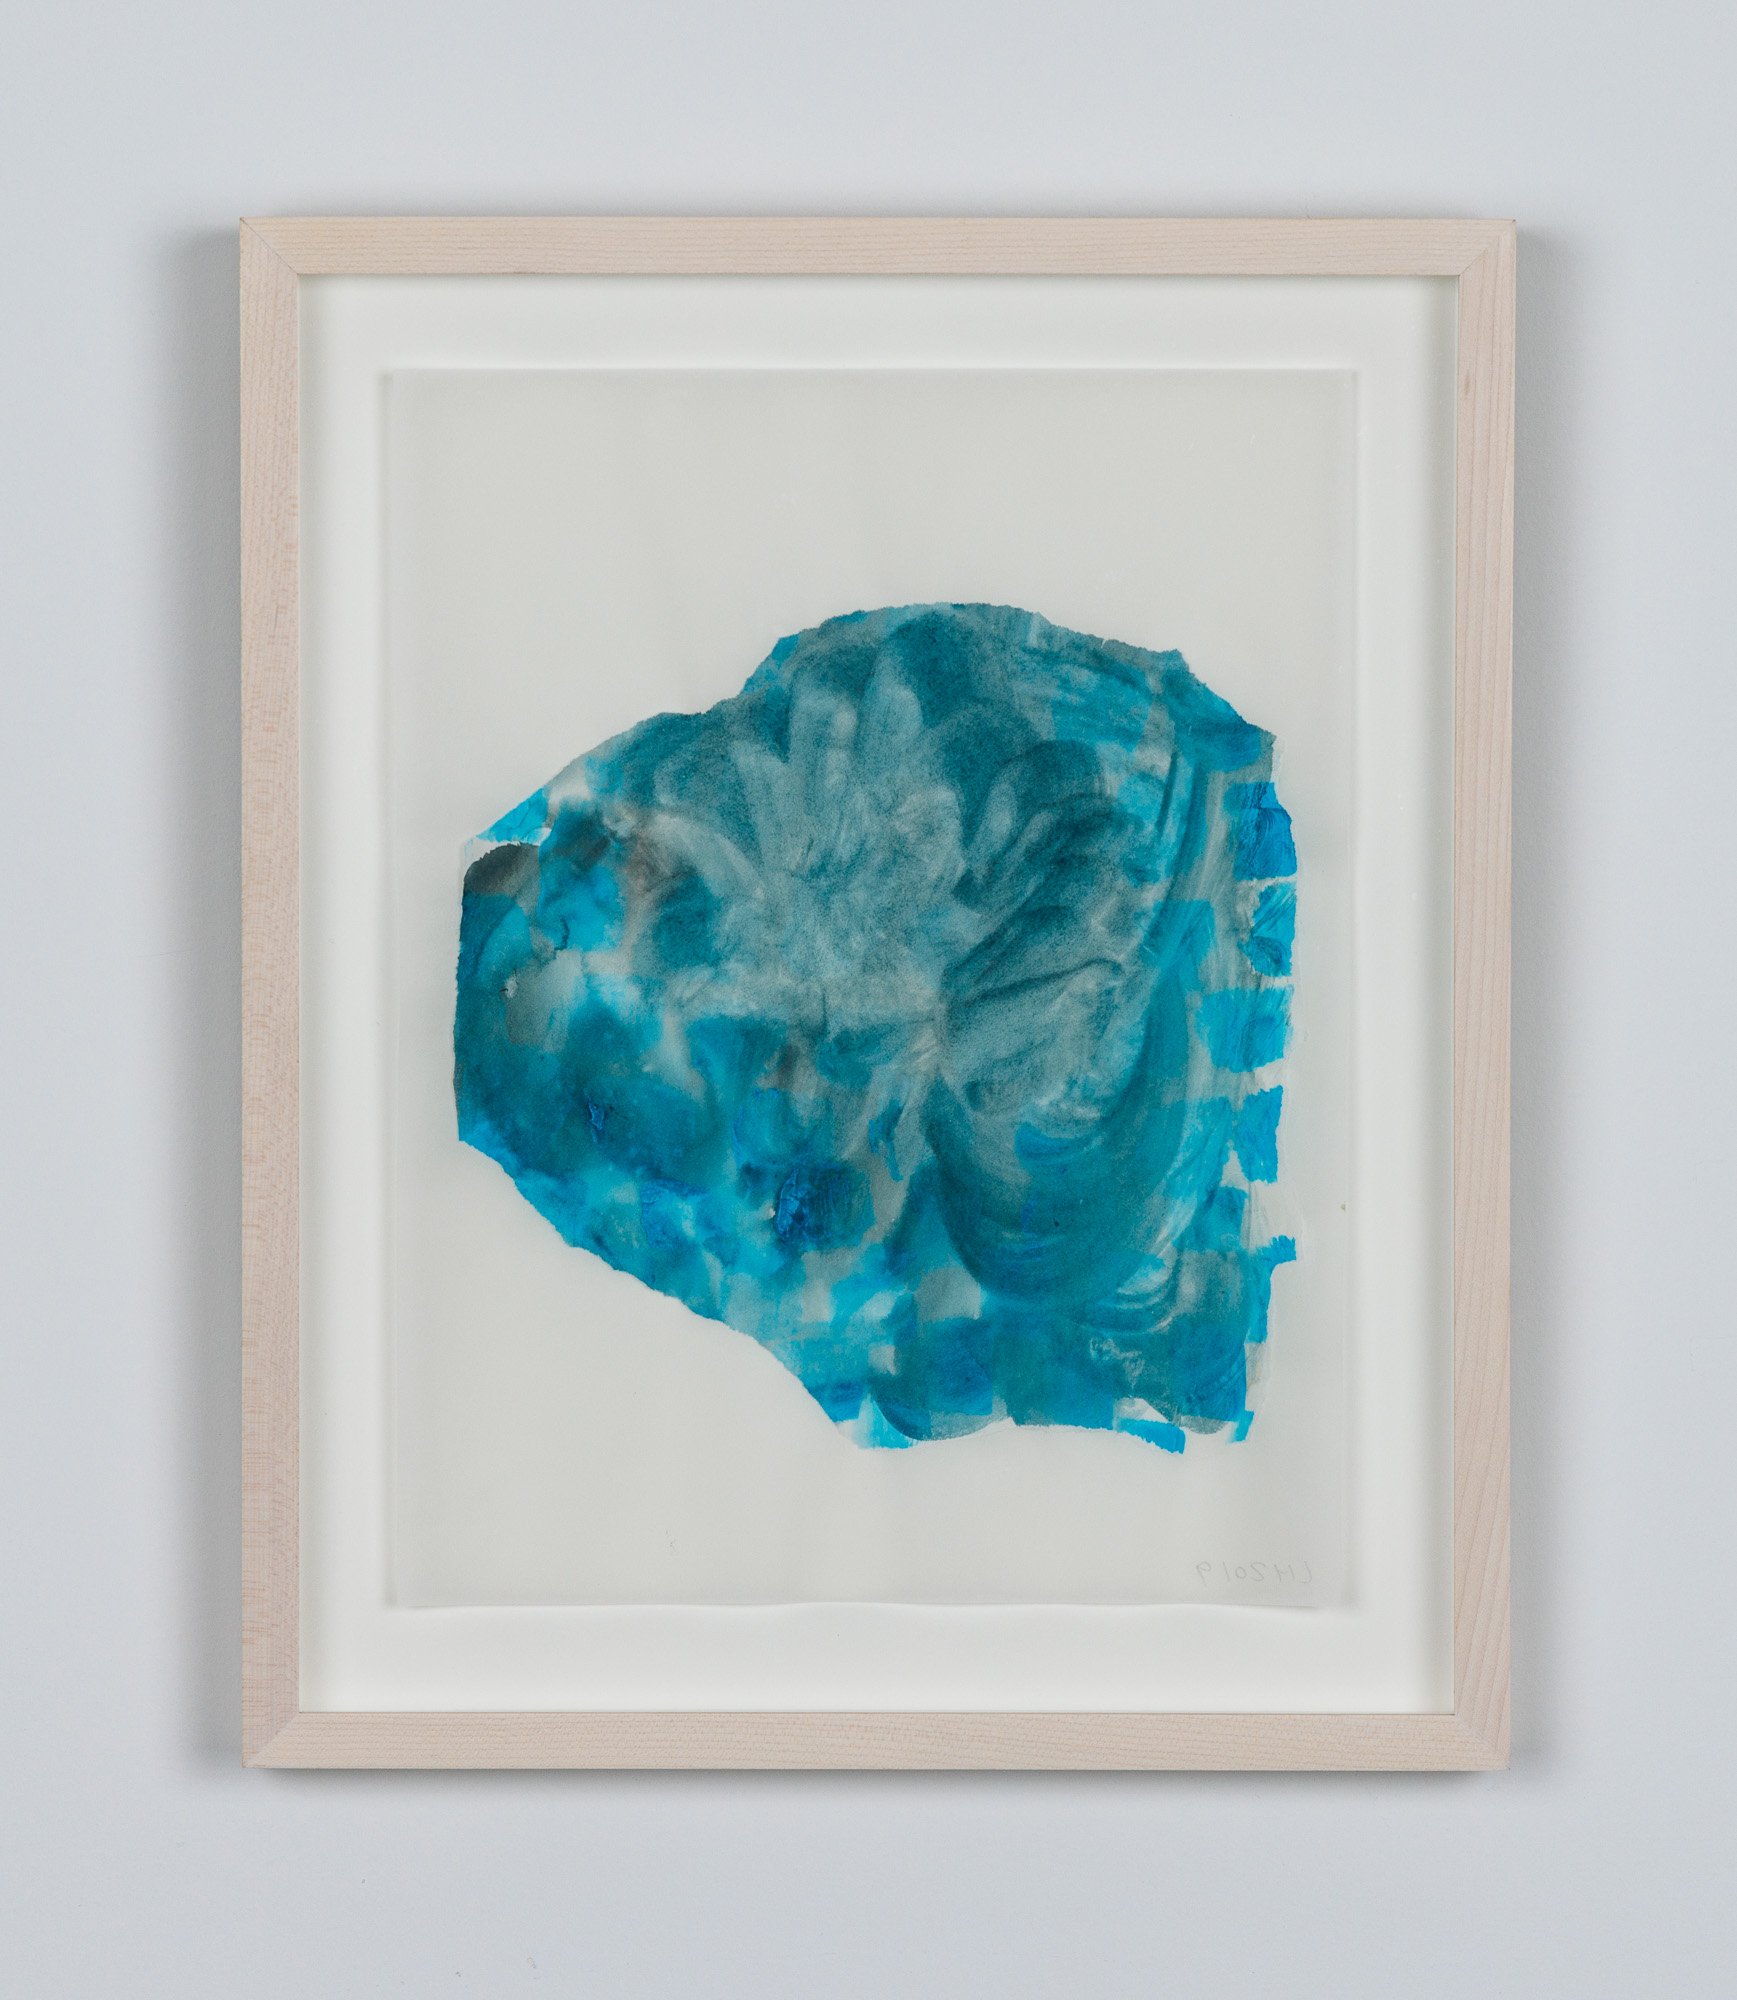  Laura Hunt,  Untitled (blue) , 2021, watercolor and collage on vellum, framed, 13.75 x 11.25 inches. 